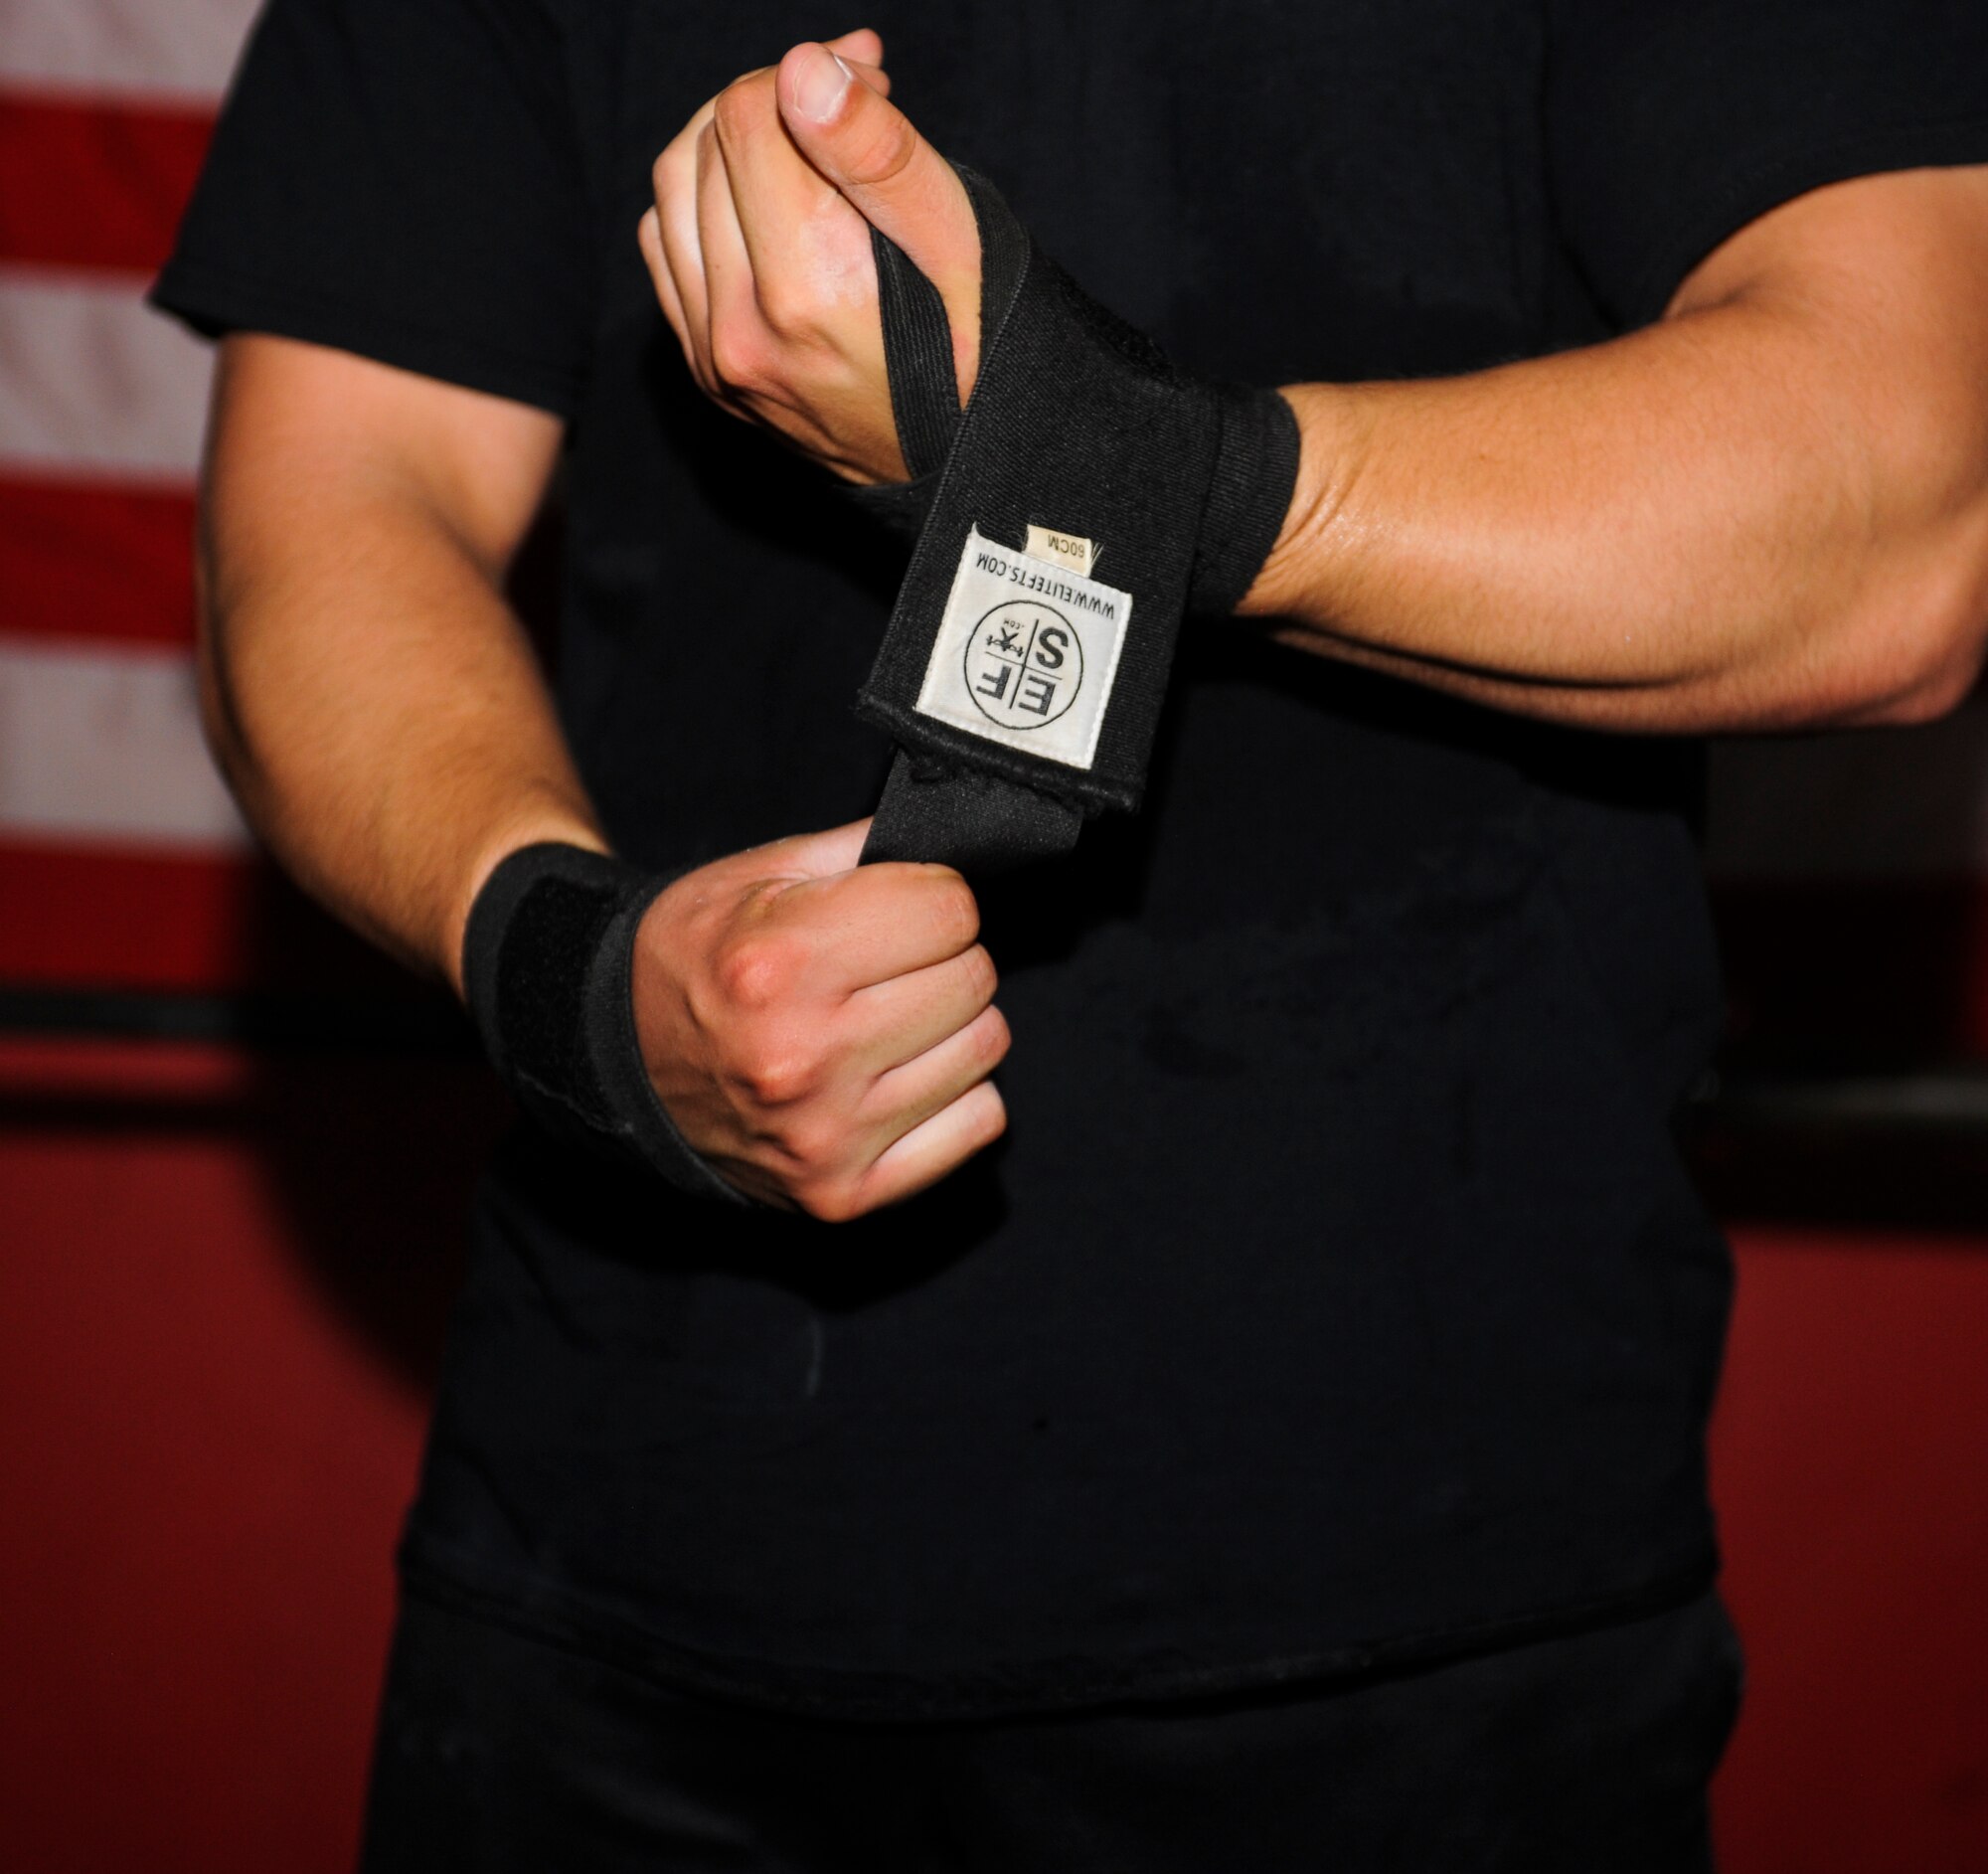 U.S. Air Force Staff Sgt. David Labrie, 612th Support Squadron lead meteorologist and powerlifter, wraps his wrists before lifting during a training session at a crossfit gym in Tucson, Ariz., Aug. 7, 2014. Labrie wraps his wrist to help strengthen them as well as give him the appropriate range of motion during each lift. (U.S. Air Force photo by Airman 1st Class Sivan Veazie/Released)